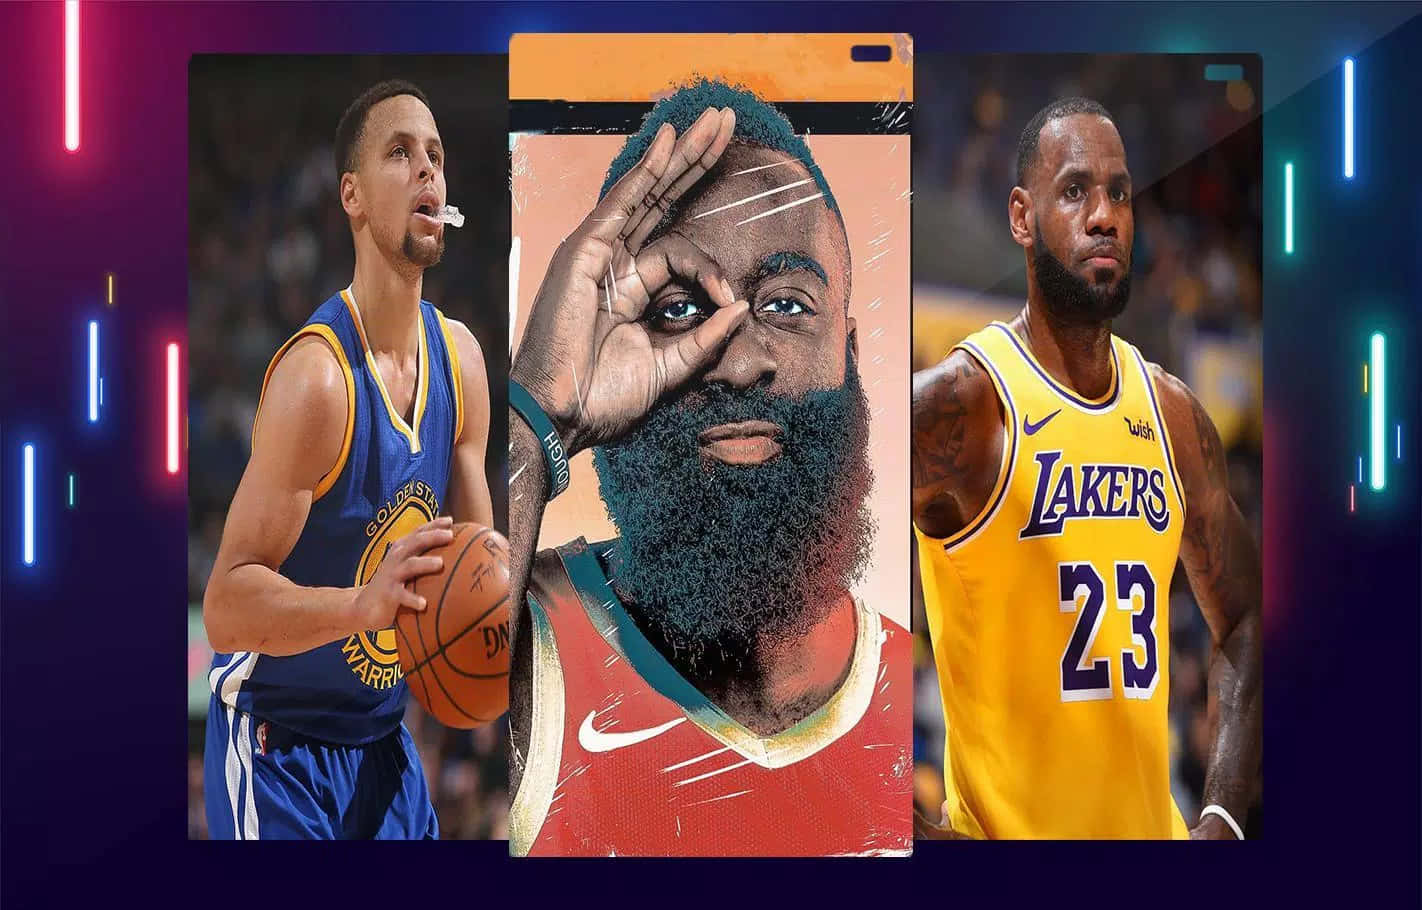 A Star-Studded Lineup - The Three Greatest Legends of the NBA Wallpaper